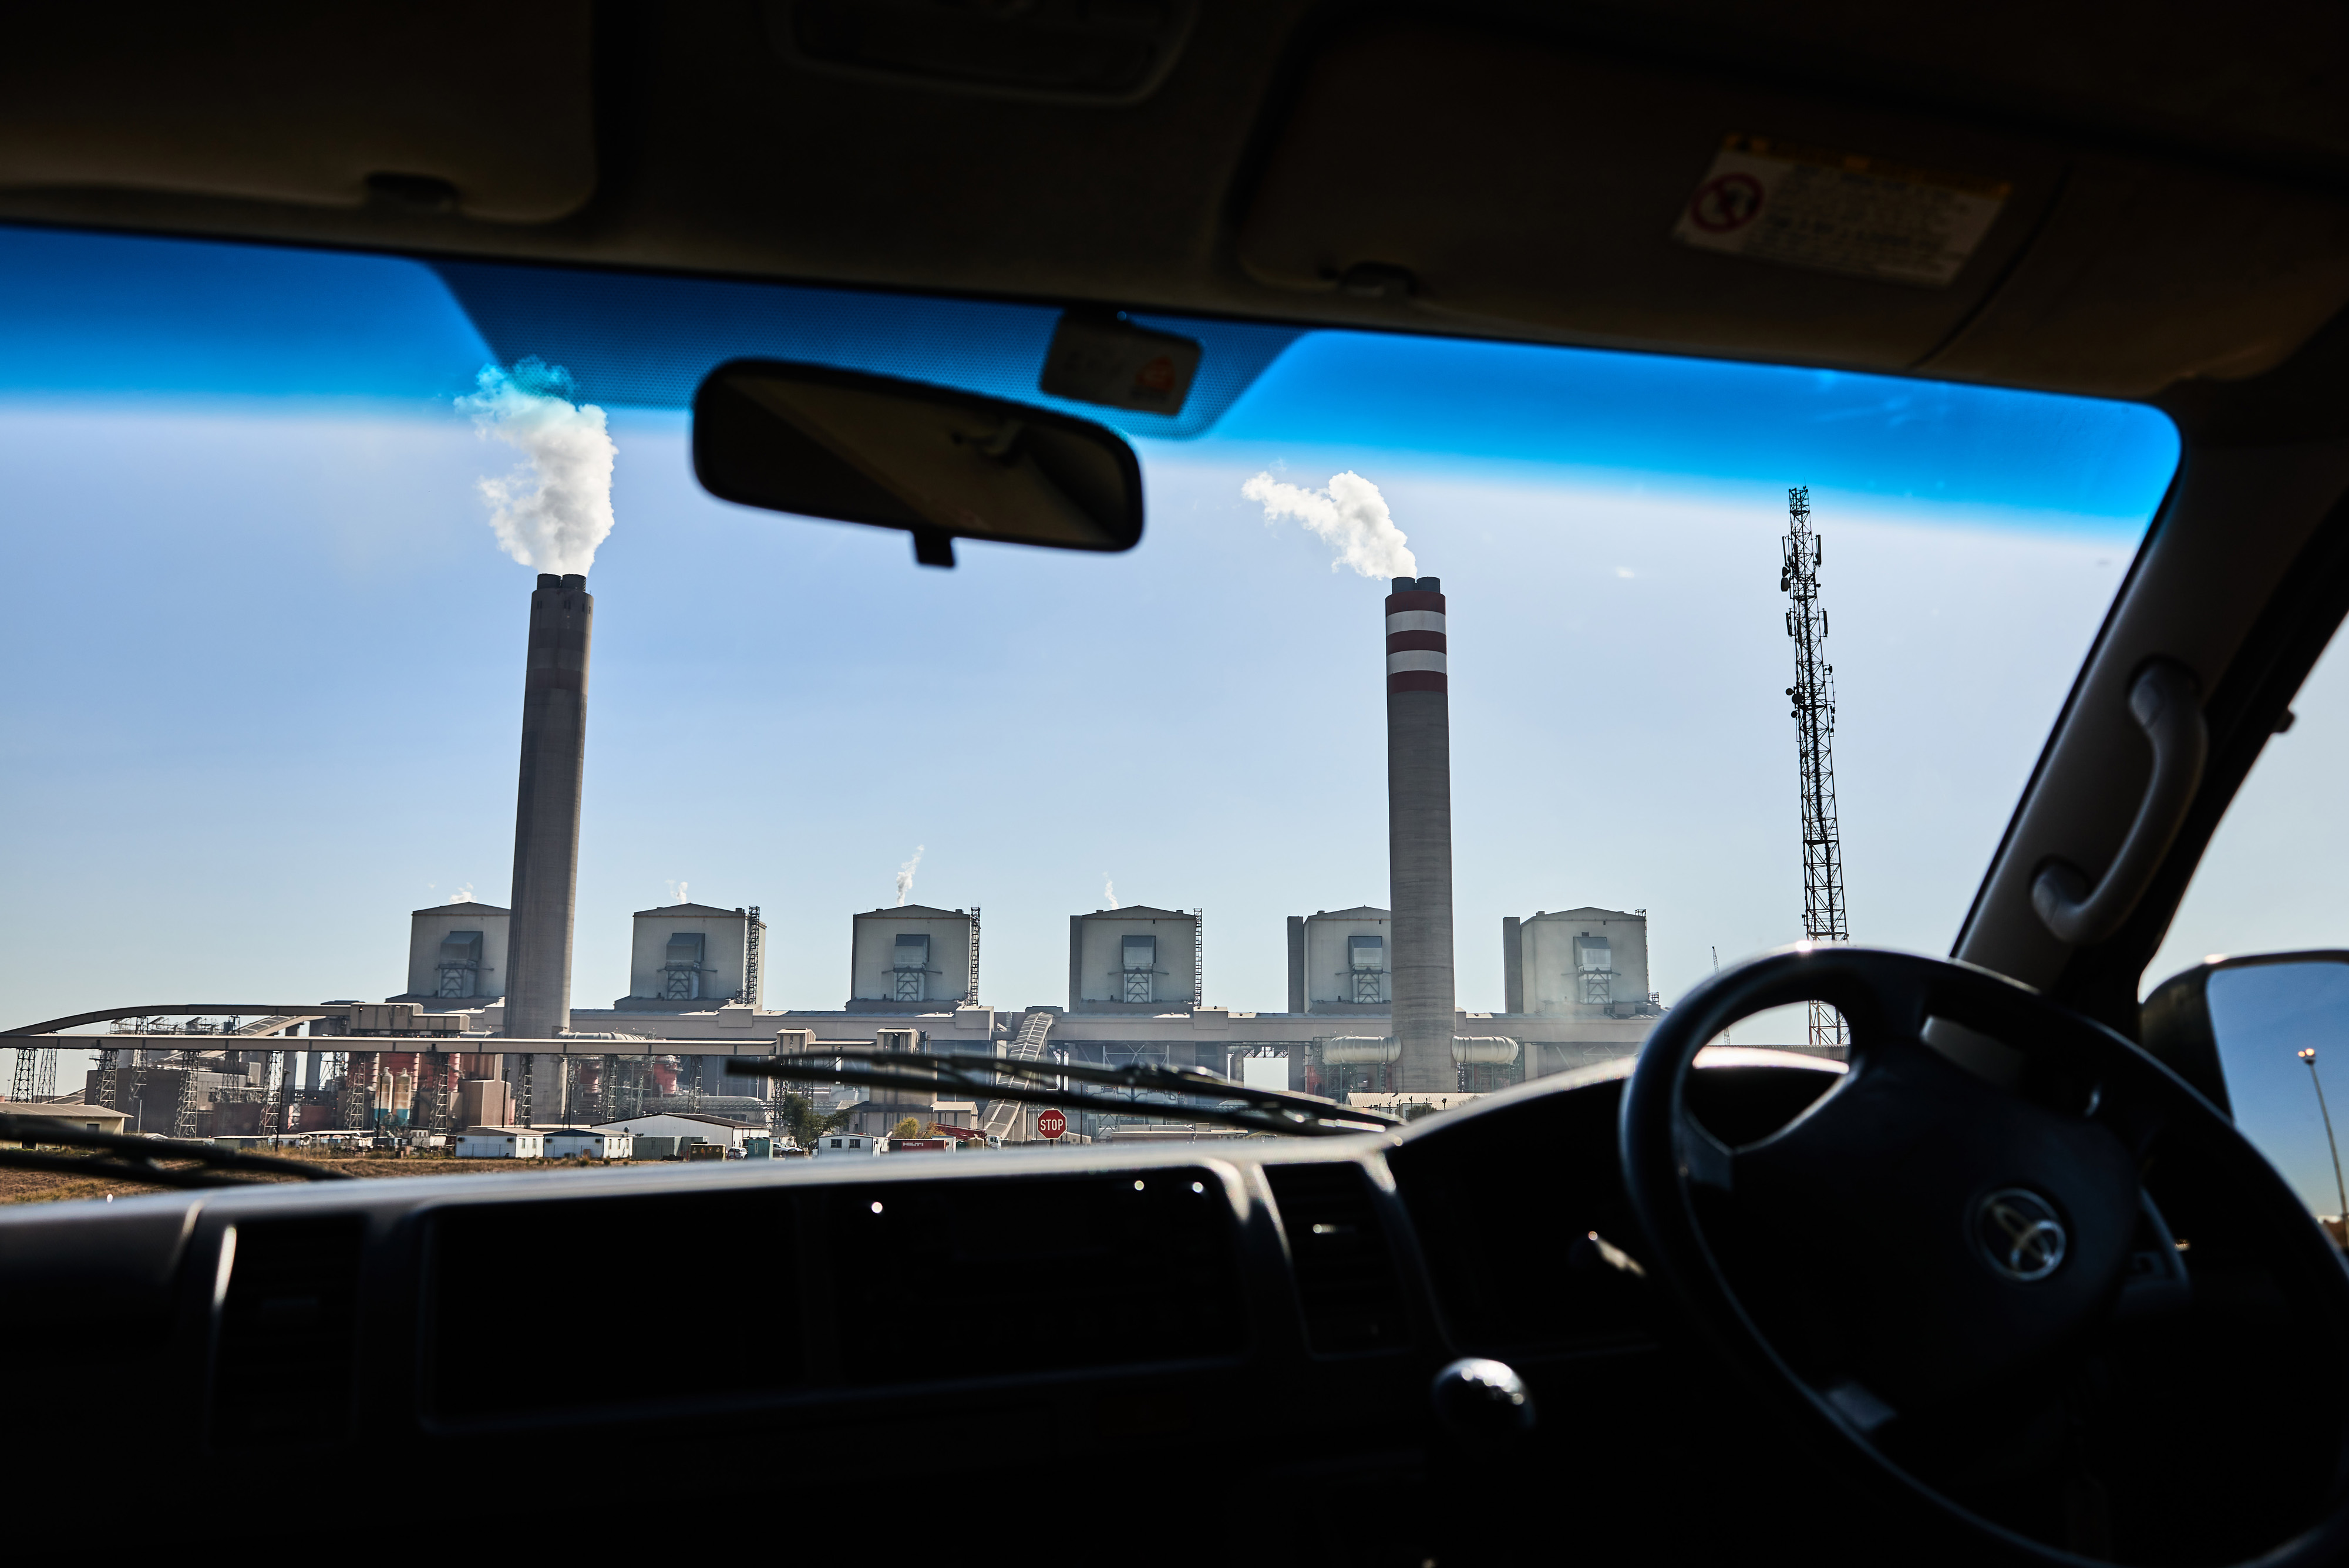 Eskom's Kusile coal-fired power station in Delmas, South Africa.